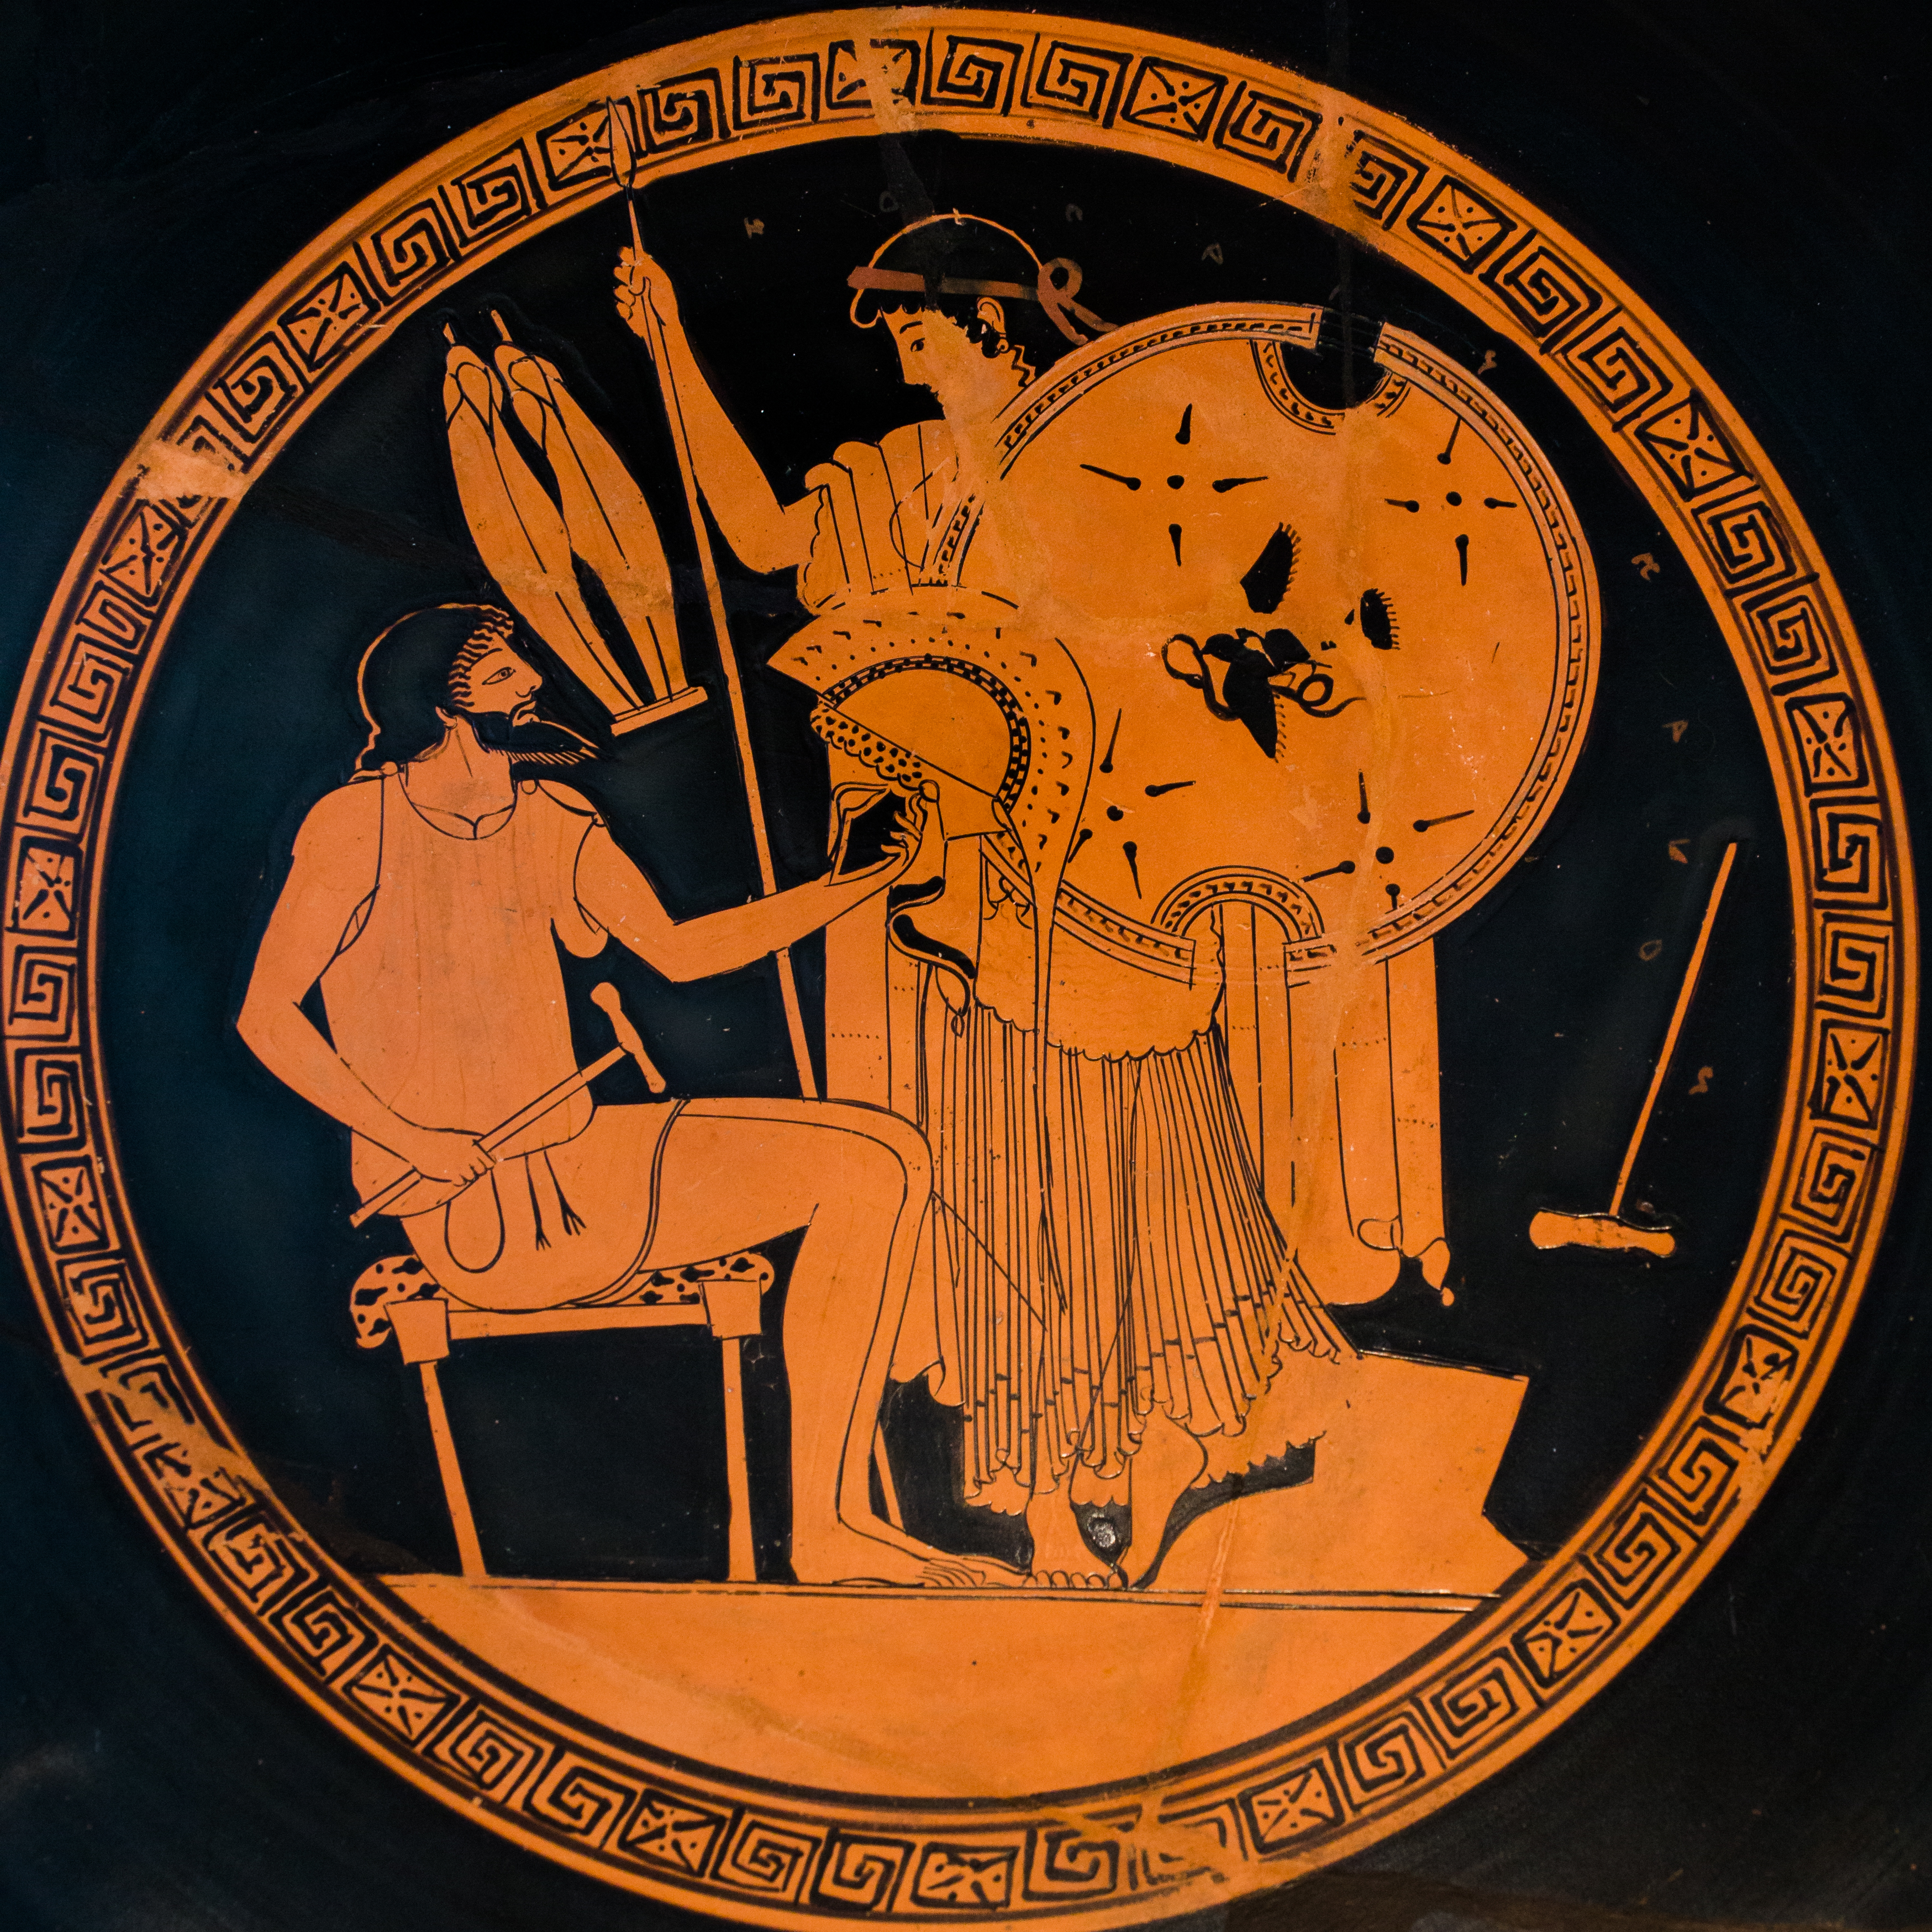 Hephaestus, bearded, seated, and holding a hammer, hands a helm to Thetis. Thetis holds a spear and shield.